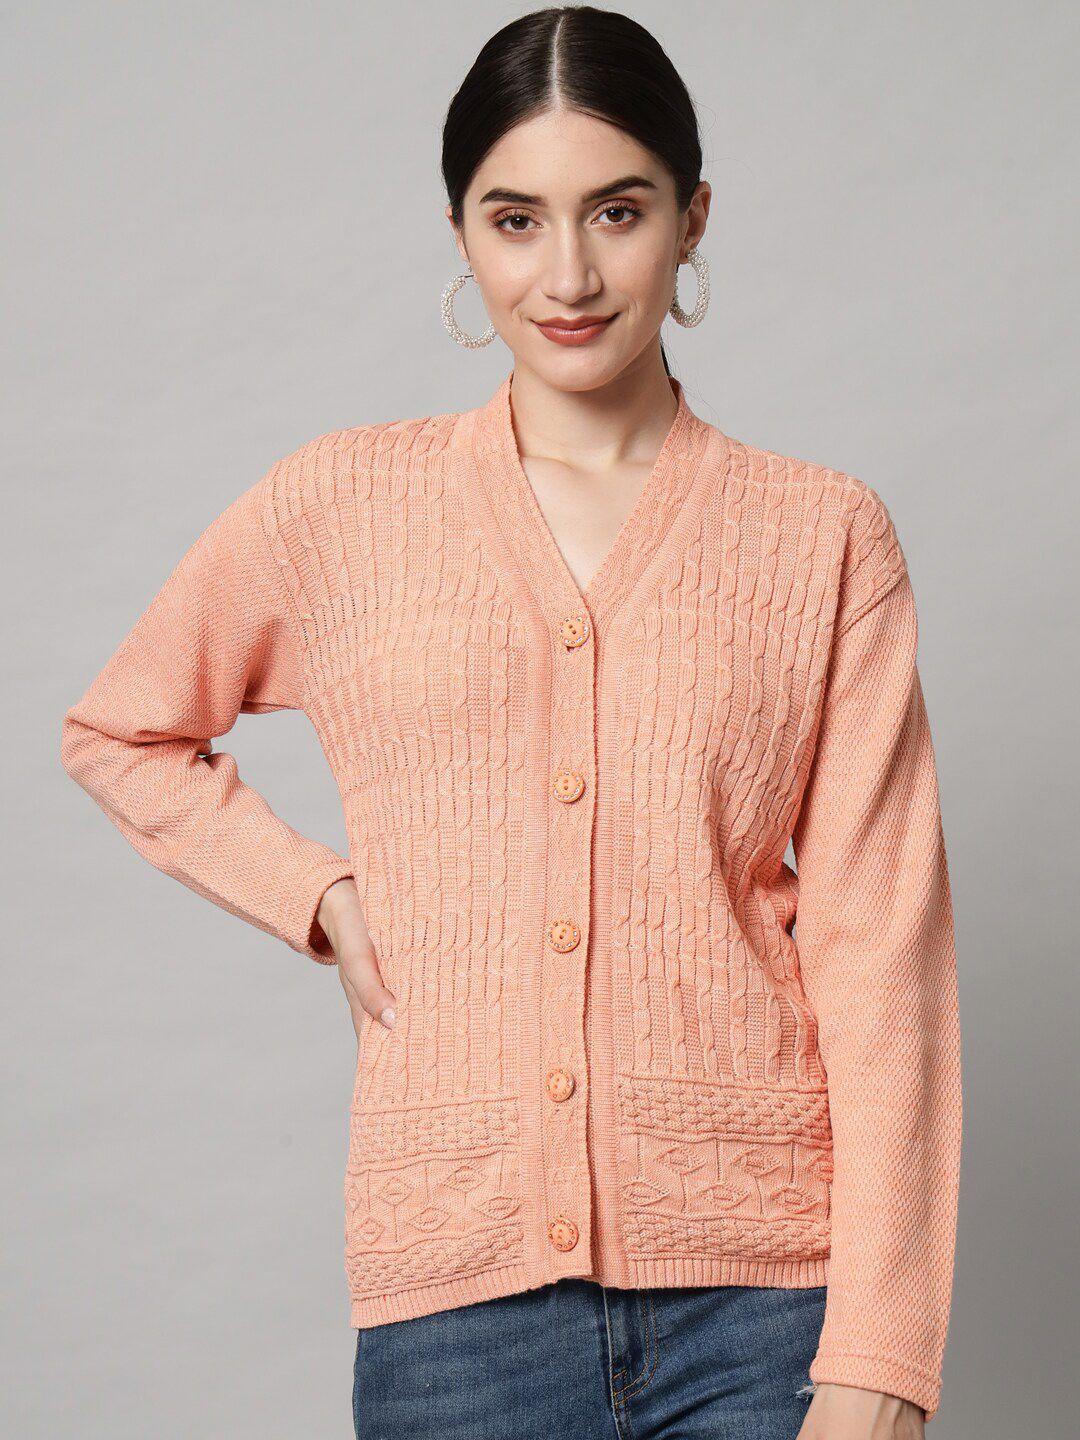 ewools cable knit acrylic woolen cardigan